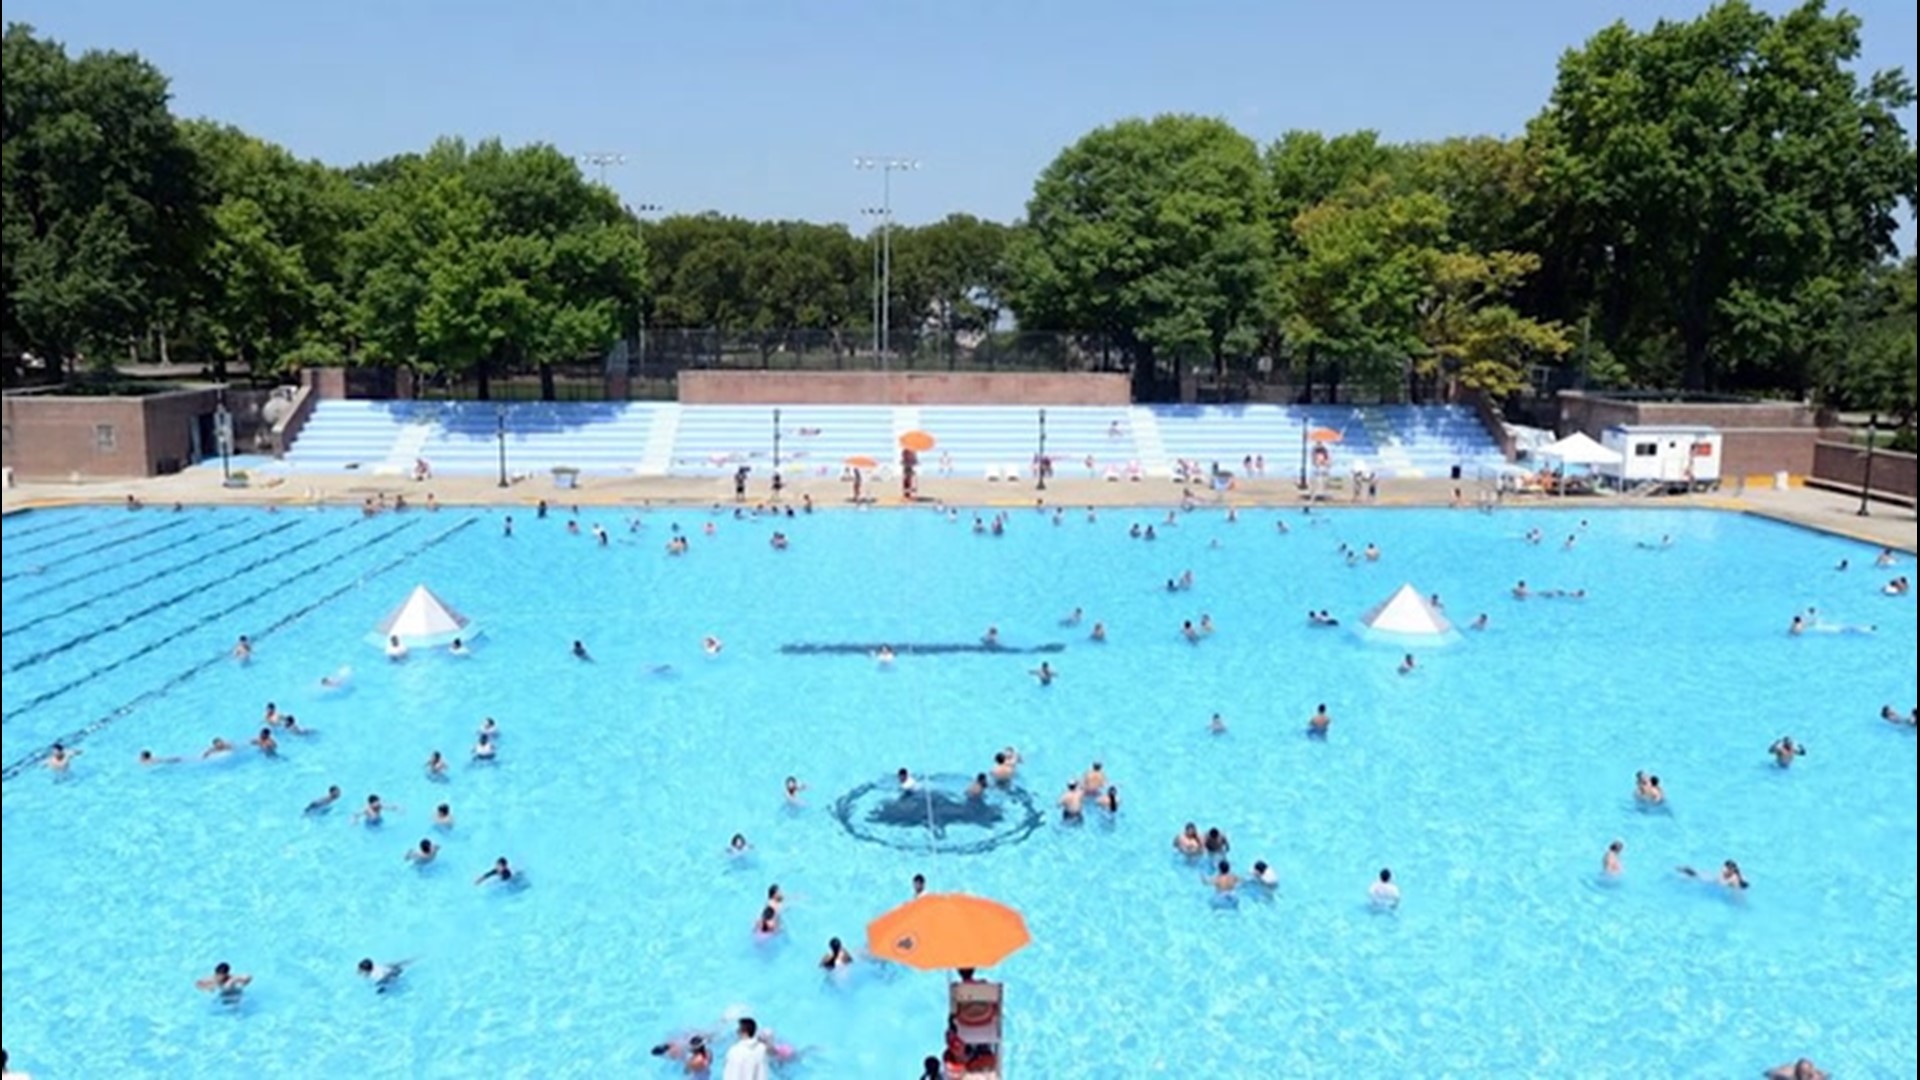 AccuWeather's Dexter Henry looks at why cooling off at swimming pools may not be an option in some areas this summer.